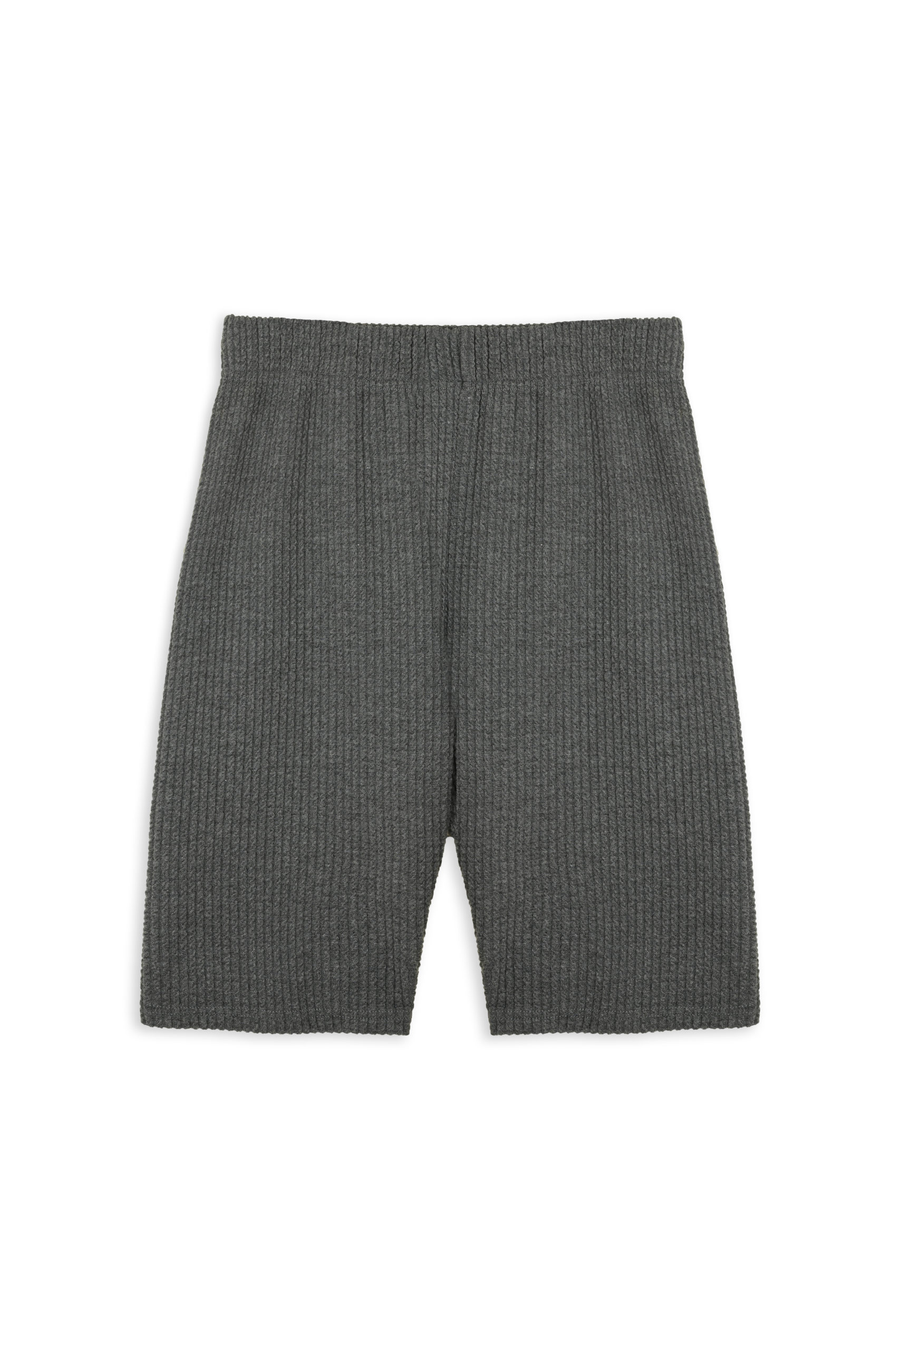 "TEXTURE" Shorts in Pewter